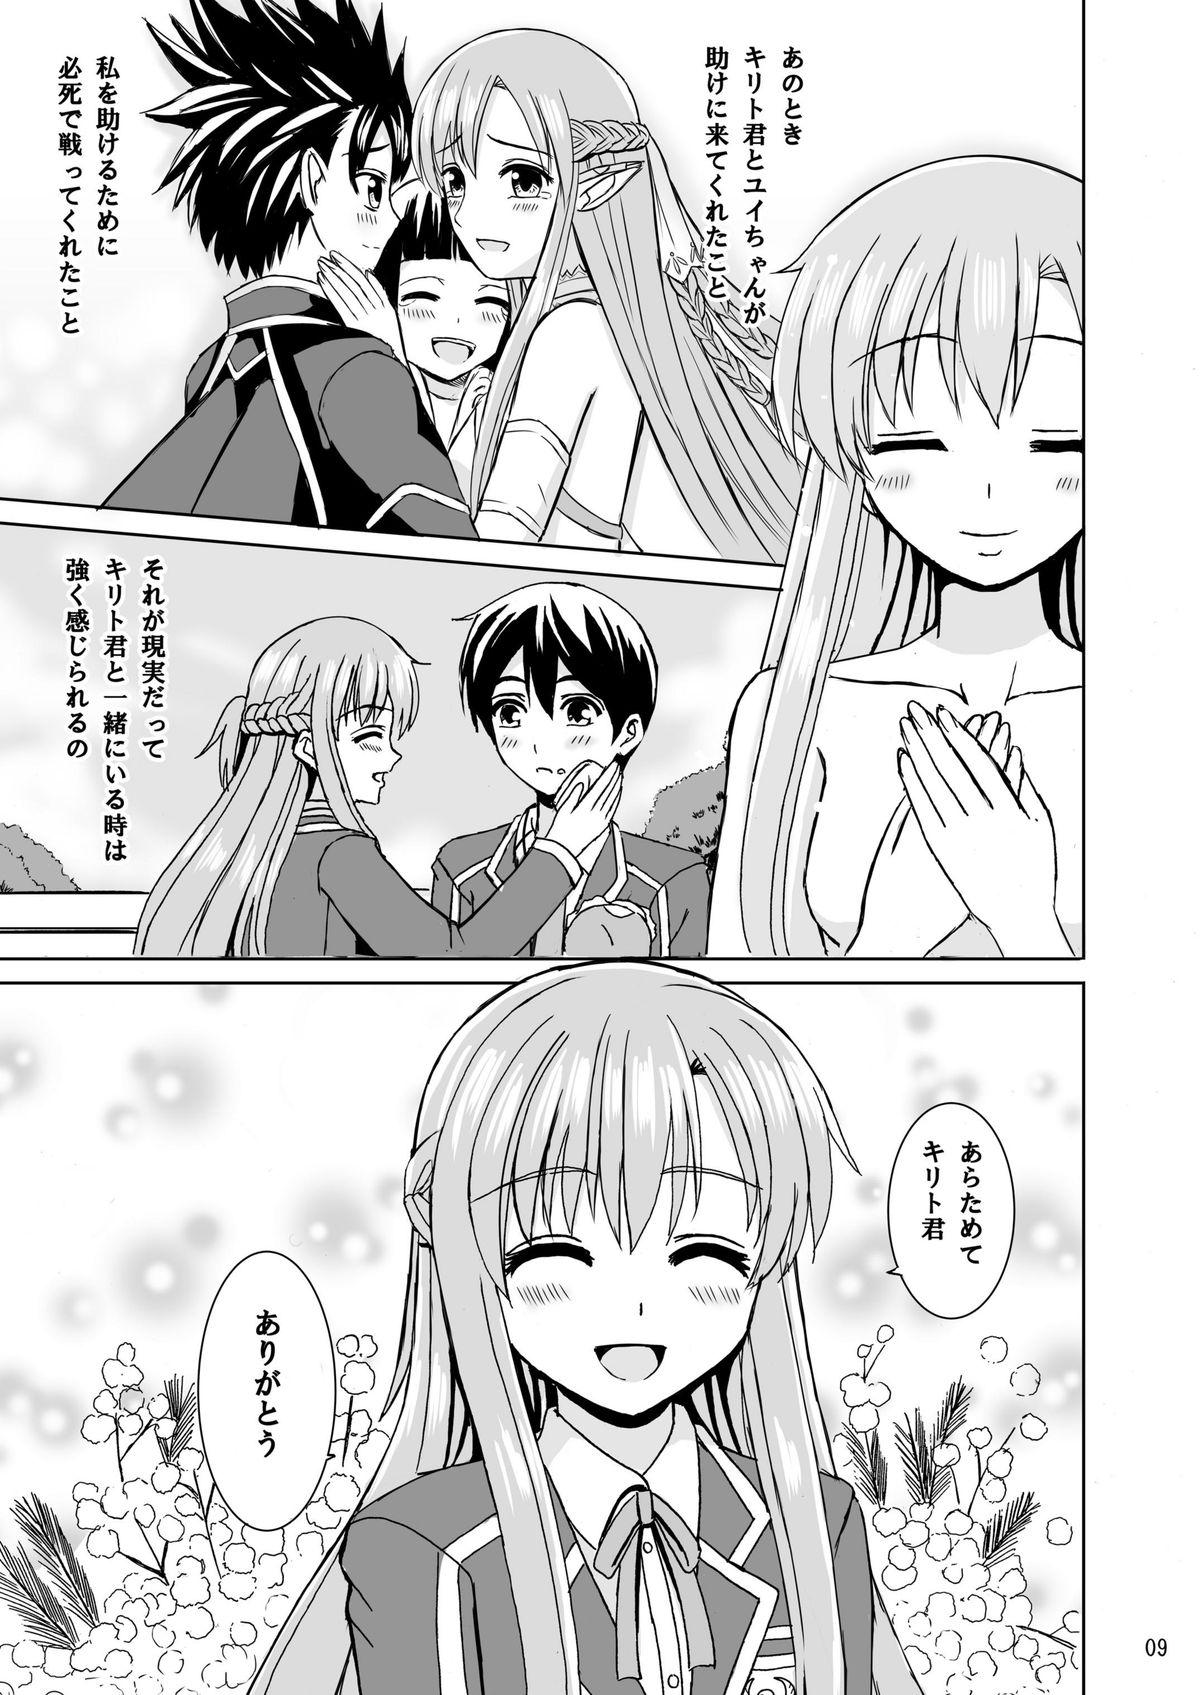 Com Zutto Kimi to Issho ni - Sword art online Atm - Page 9